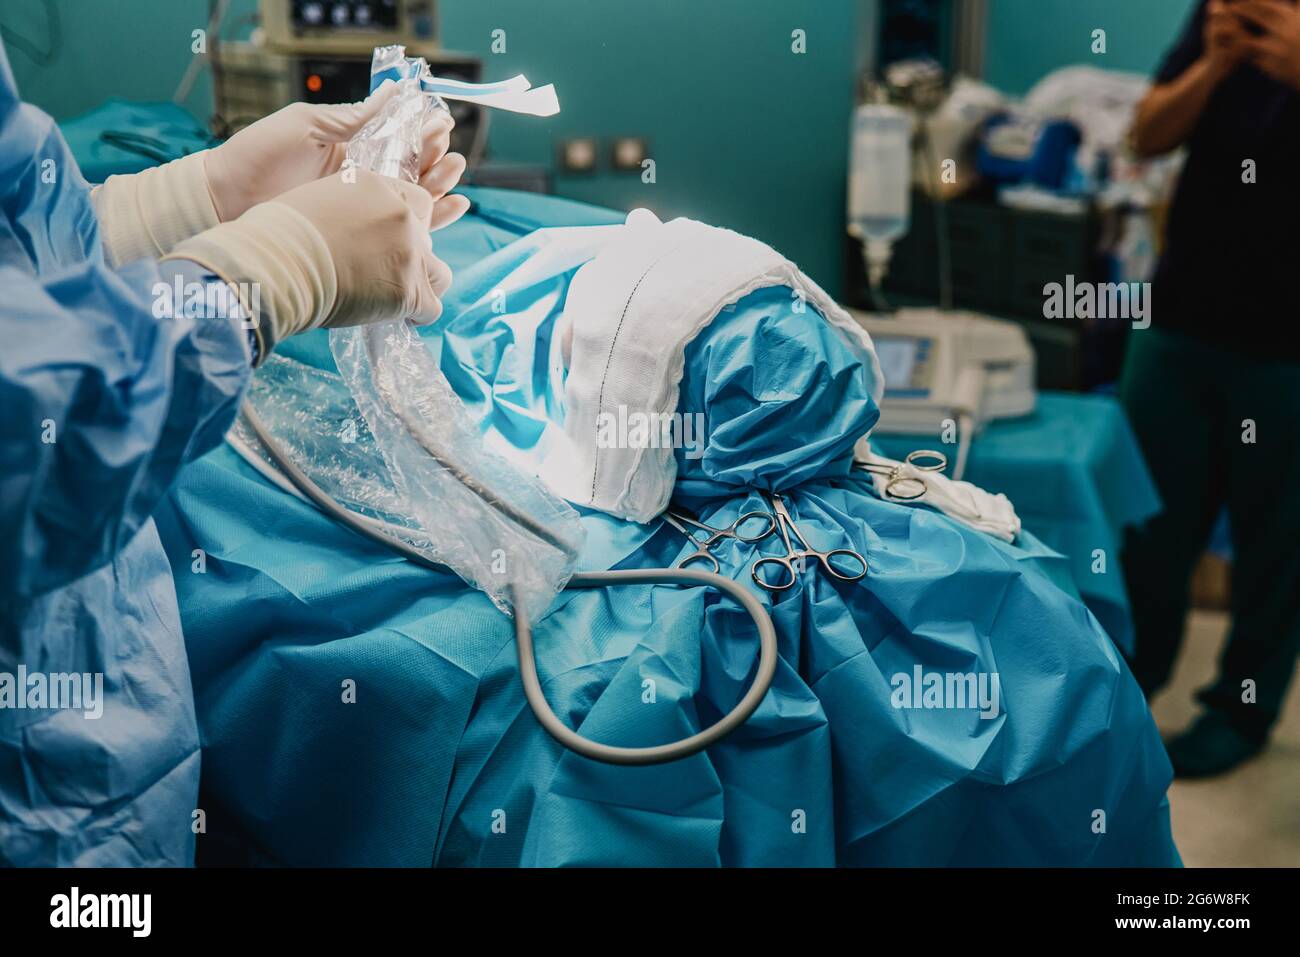 Surgeon team operating patient in surgical room at hospital - Focus on scissors Stock Photo